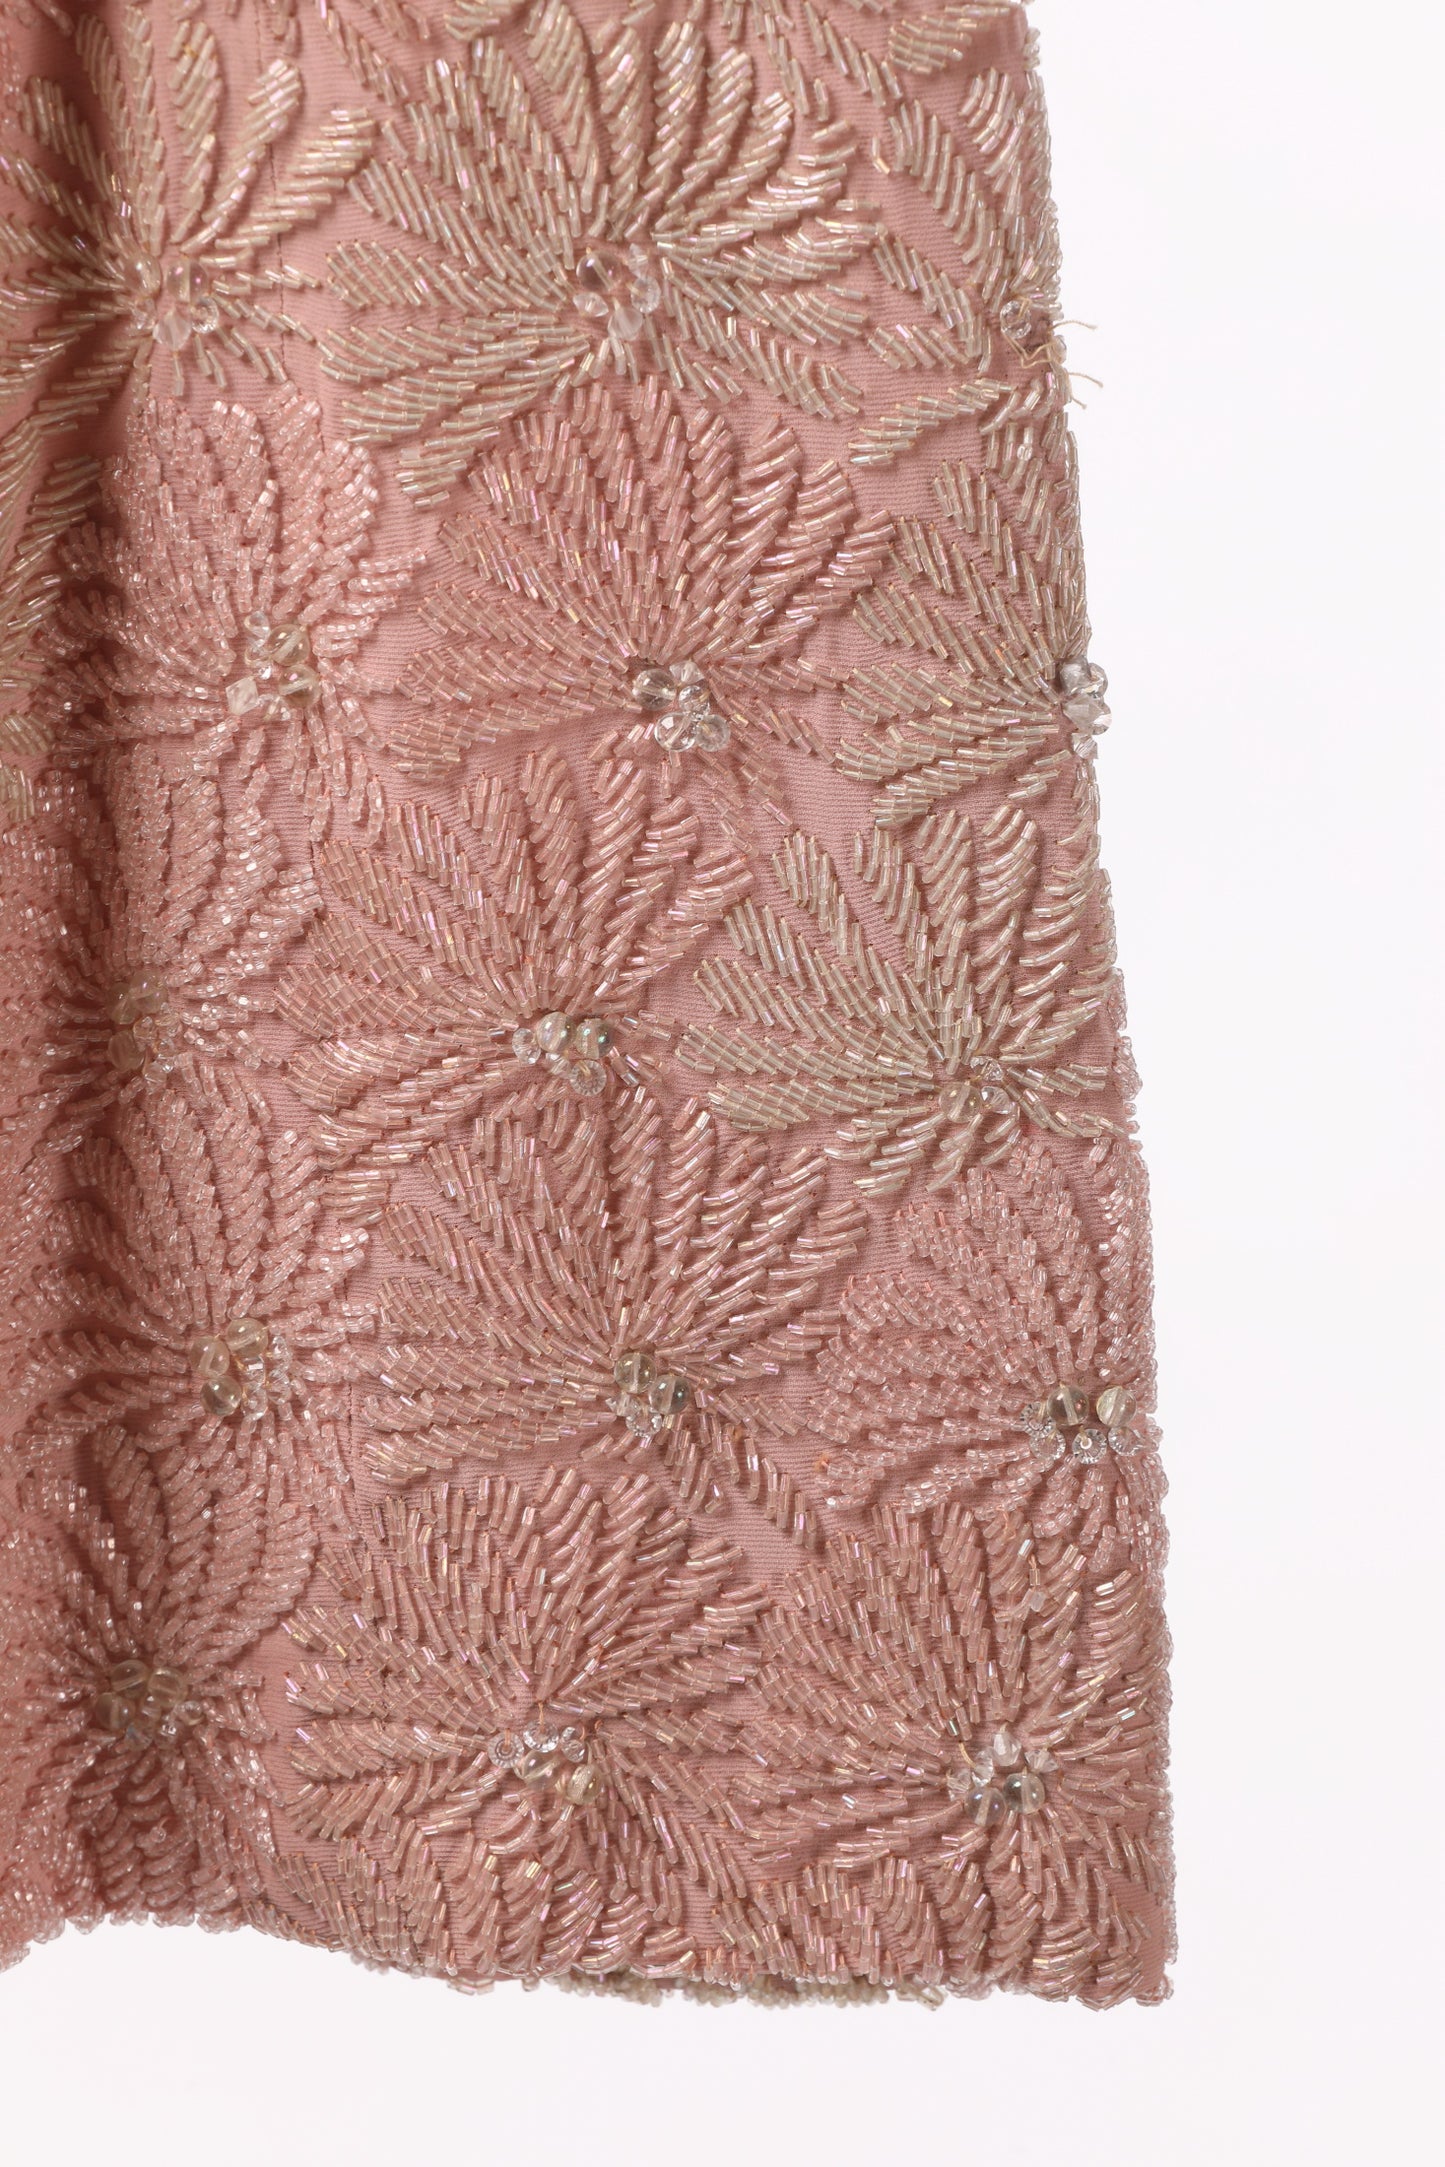 Pink sheath dress entirely
 embroidered